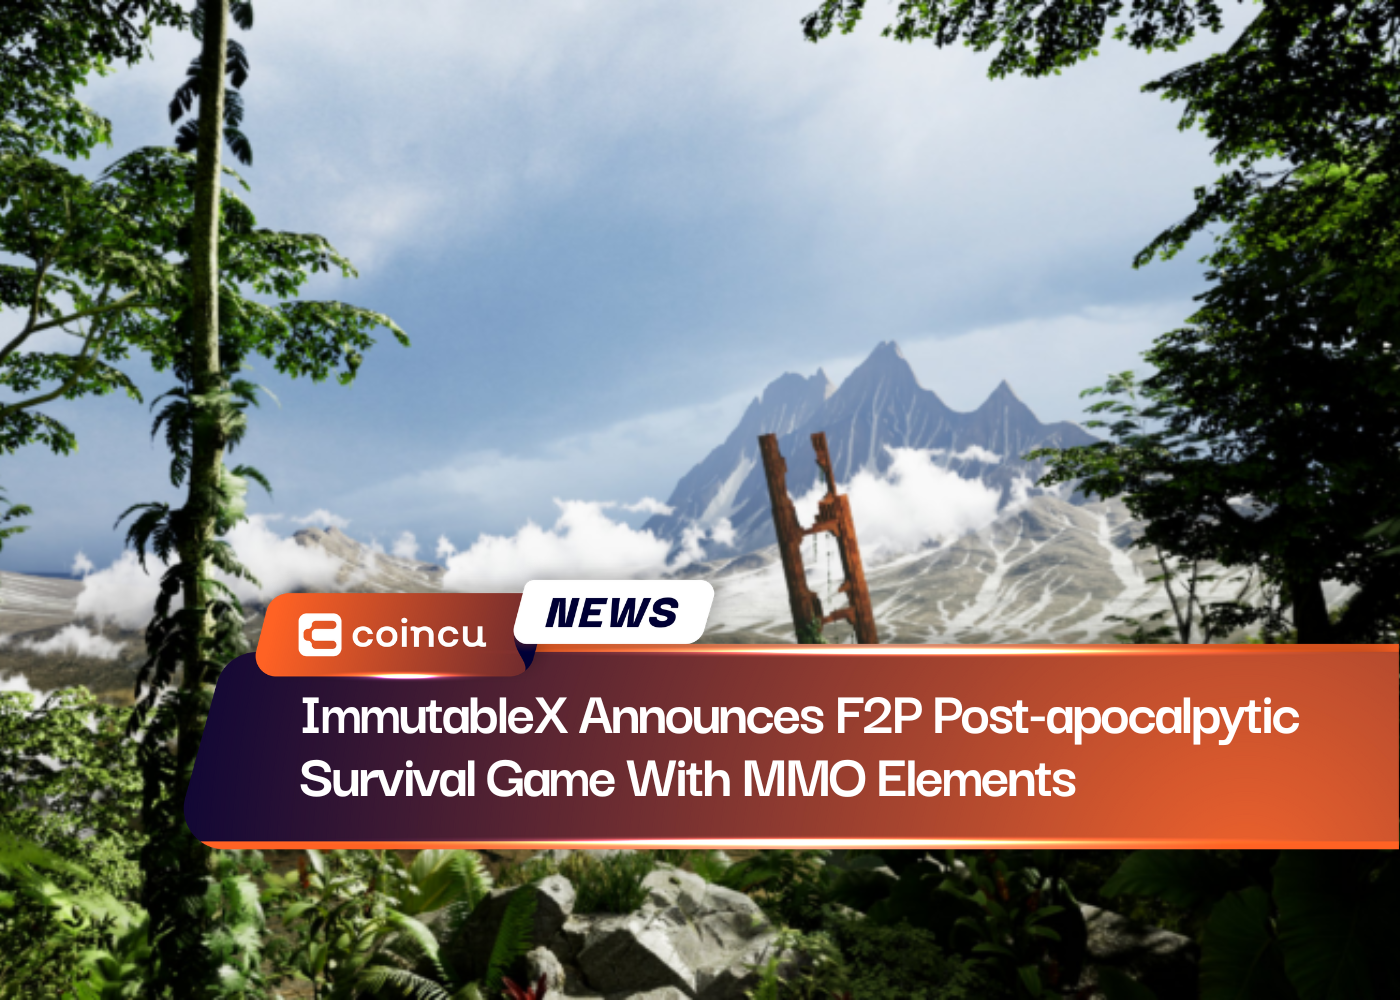 ImmutableX Announces F2P Post-apocalpytic Survival Game With MMO Elements